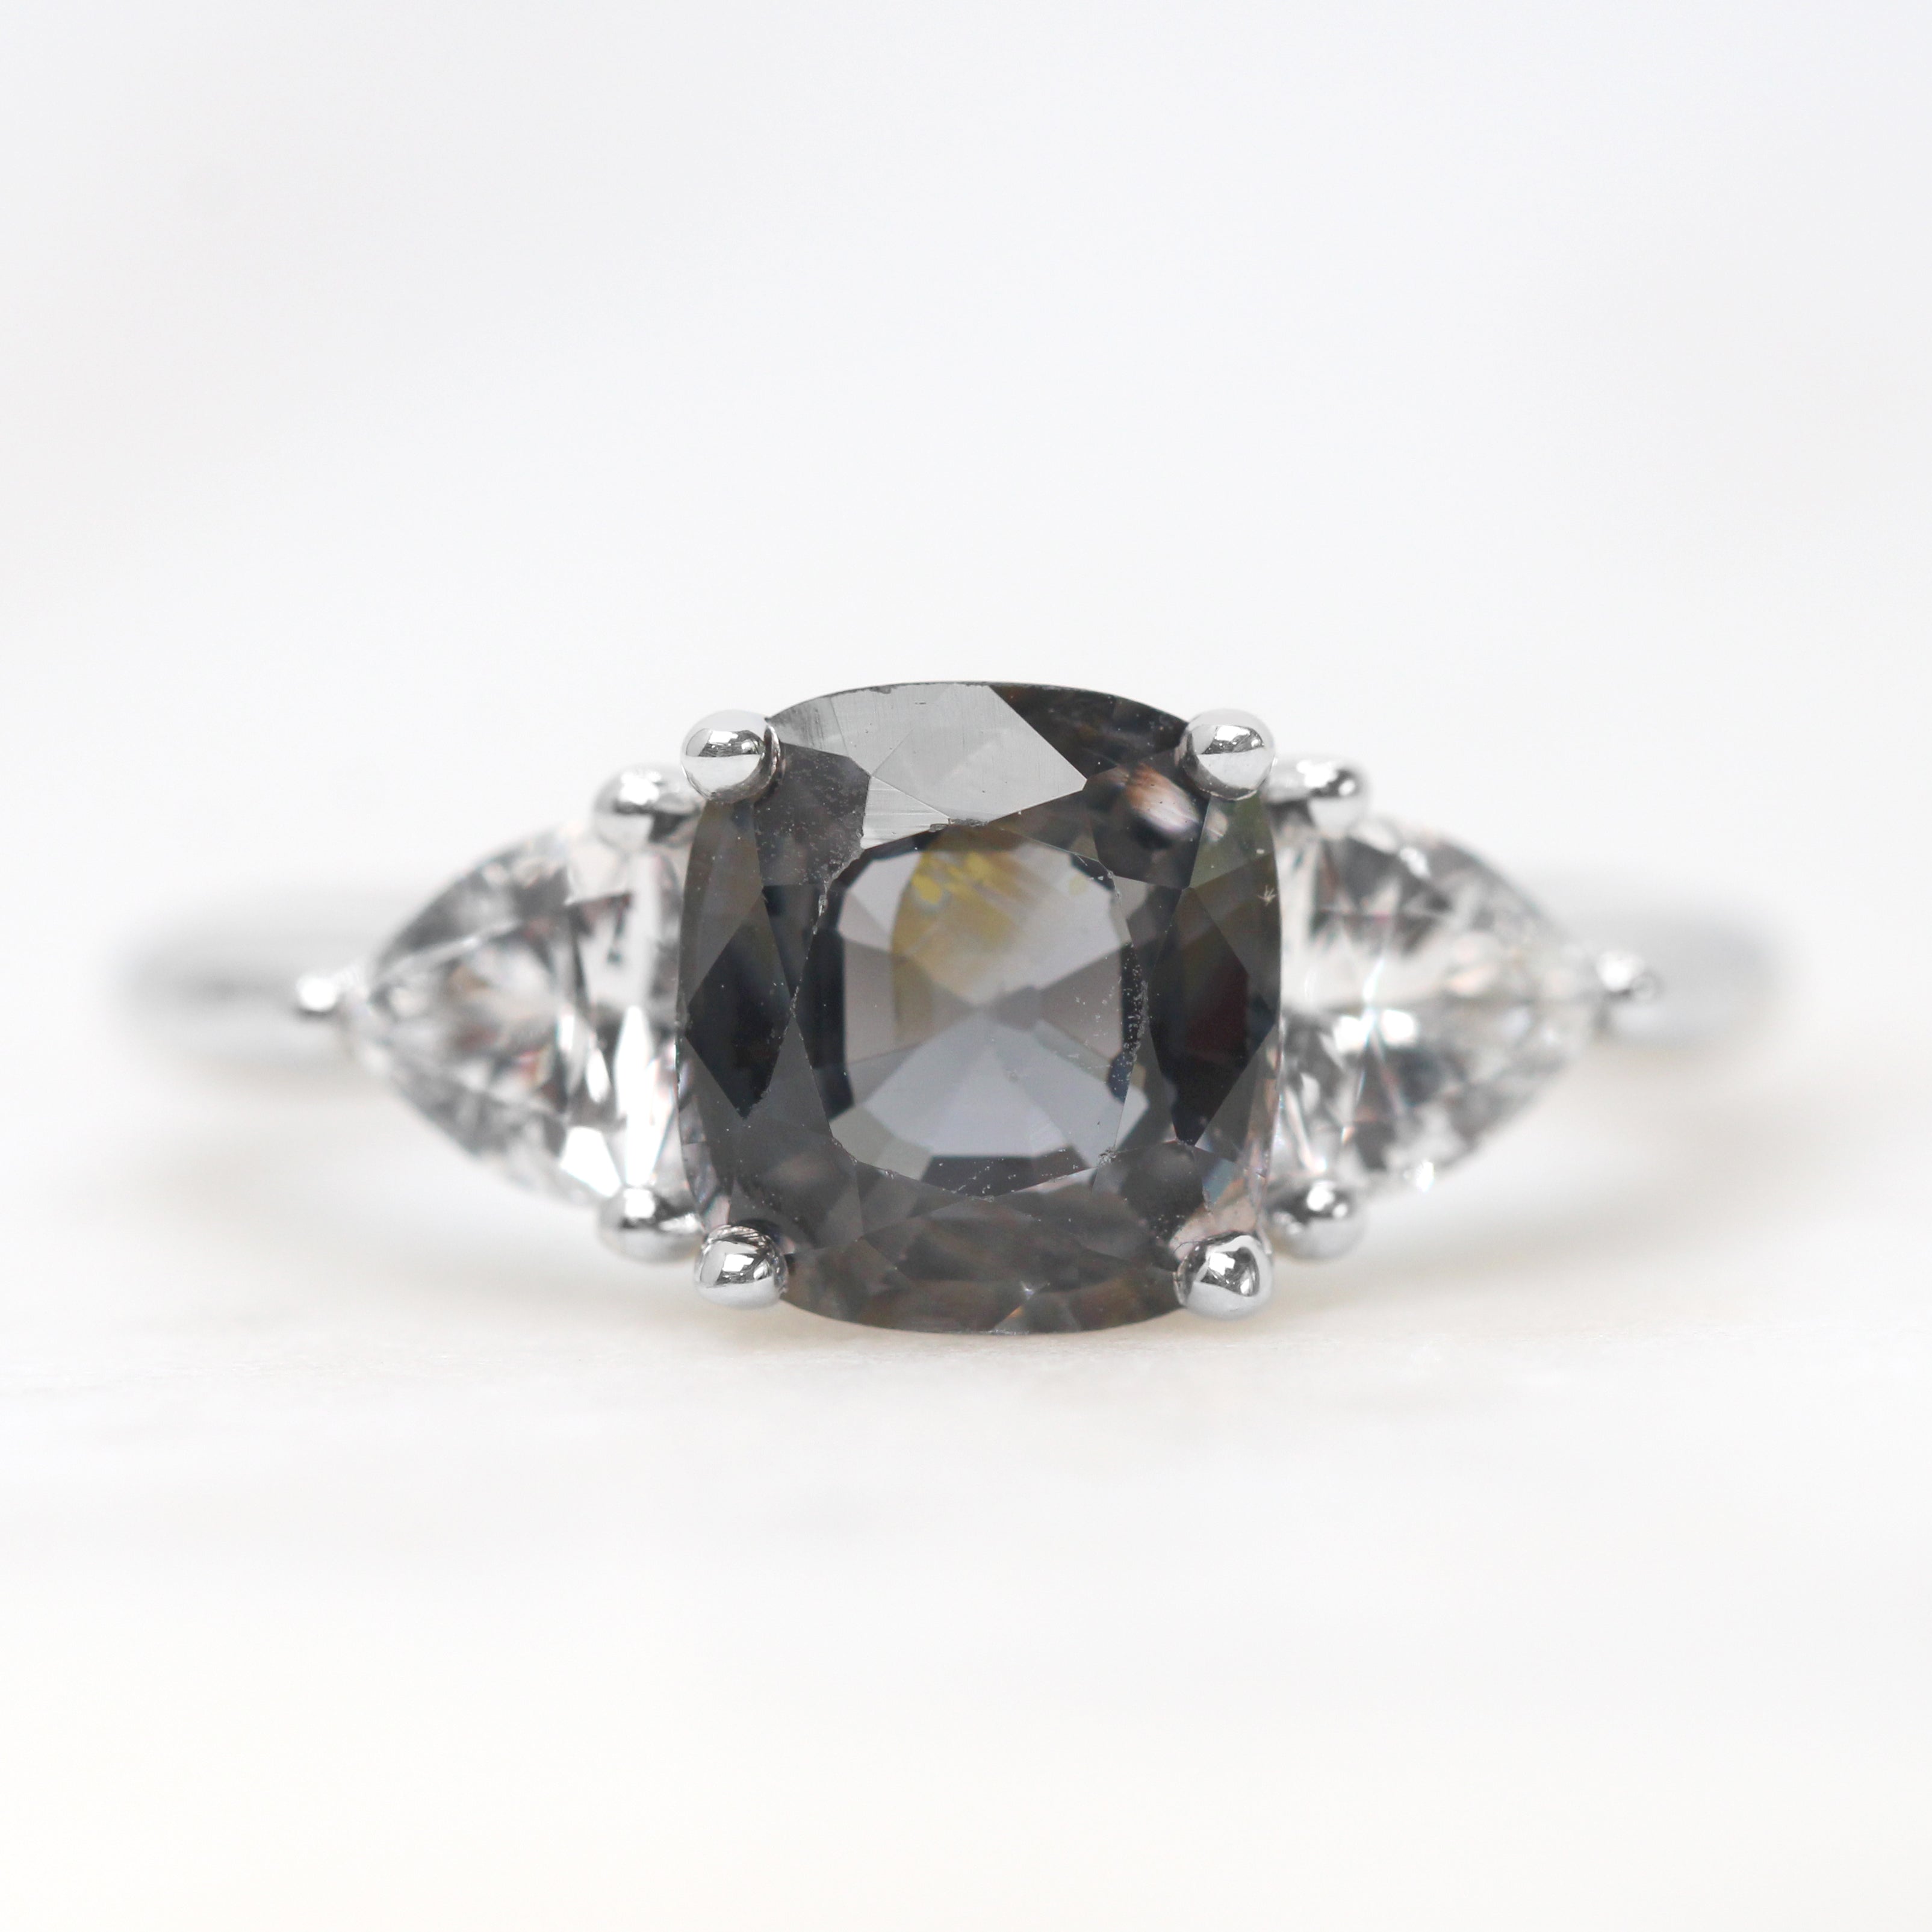 Nolen Ring with 1.98 Carat Cushion Cut Dark Purple Spinel and White Accent  Sapphires in 14k White Gold - Ready to Size and Ship